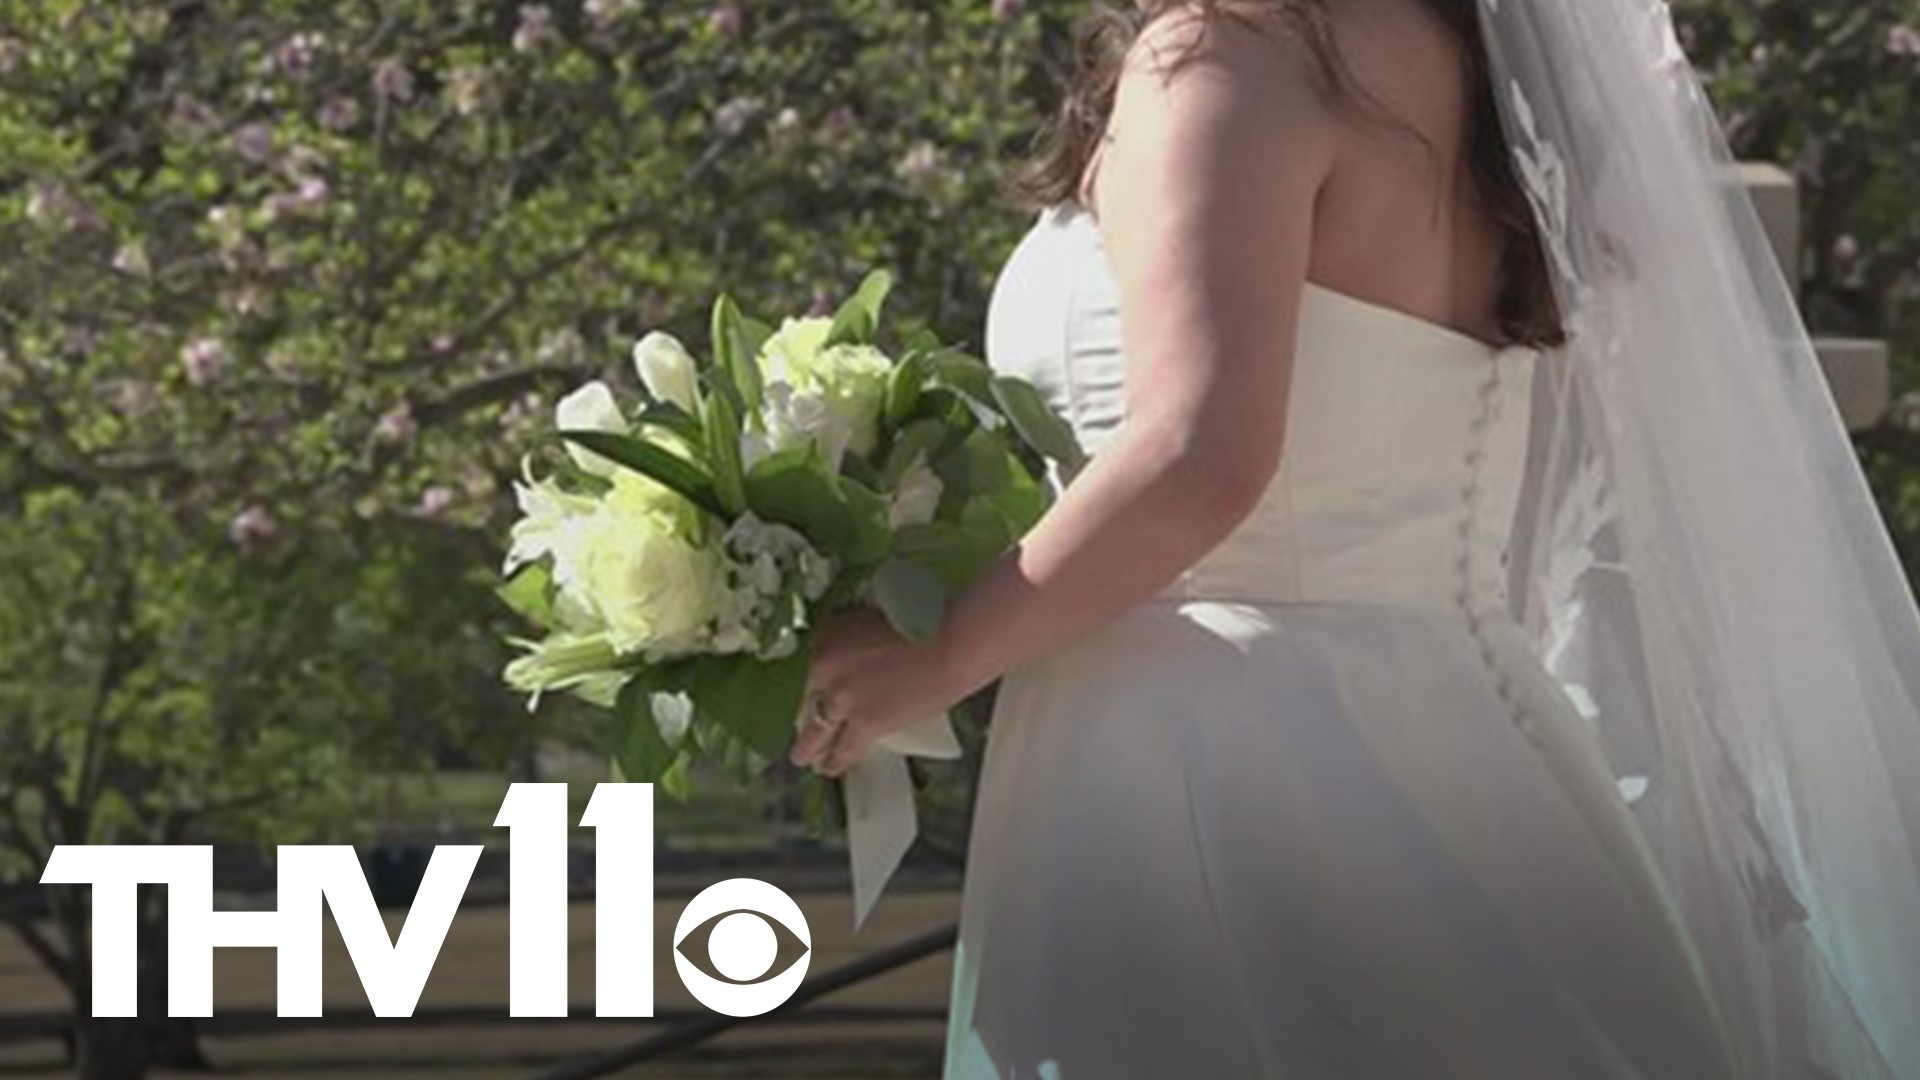 Spring is in the air and so is love for a lot of couples who are set to get married this year. Wedding experts say we're set to see a big boom in weddings for 2022.